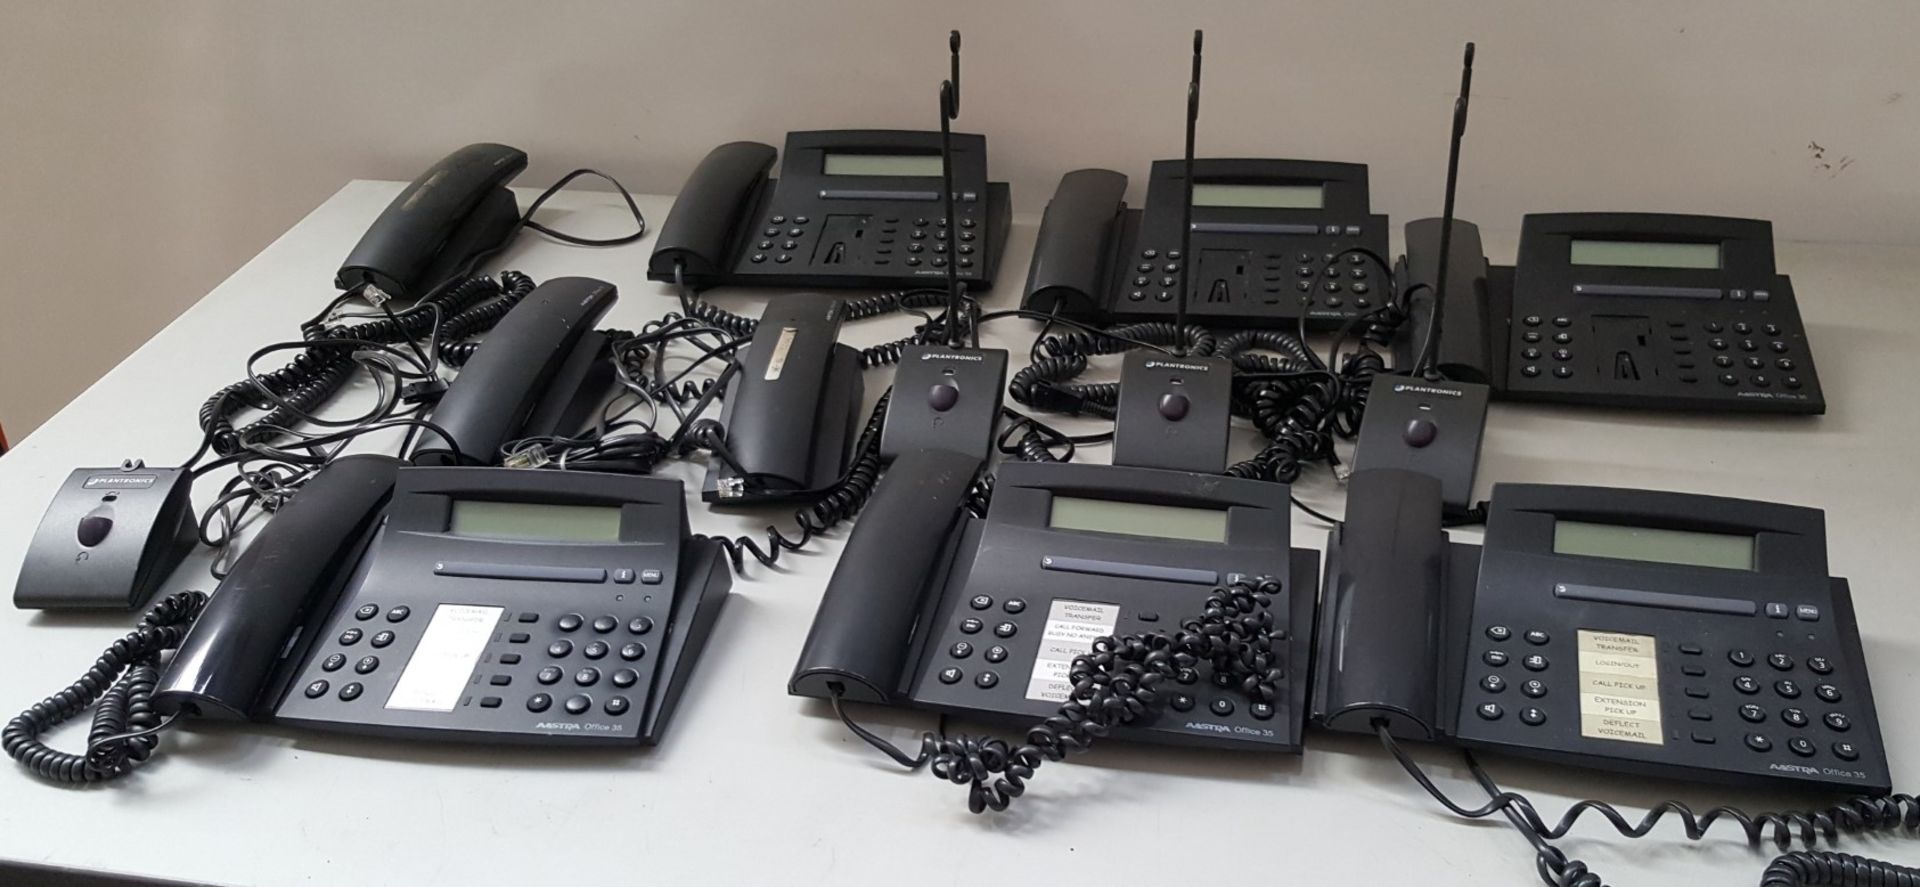 1 x Job Lot Of Various Office Phones & Biway Switches - Ref LD382 - Image 5 of 5